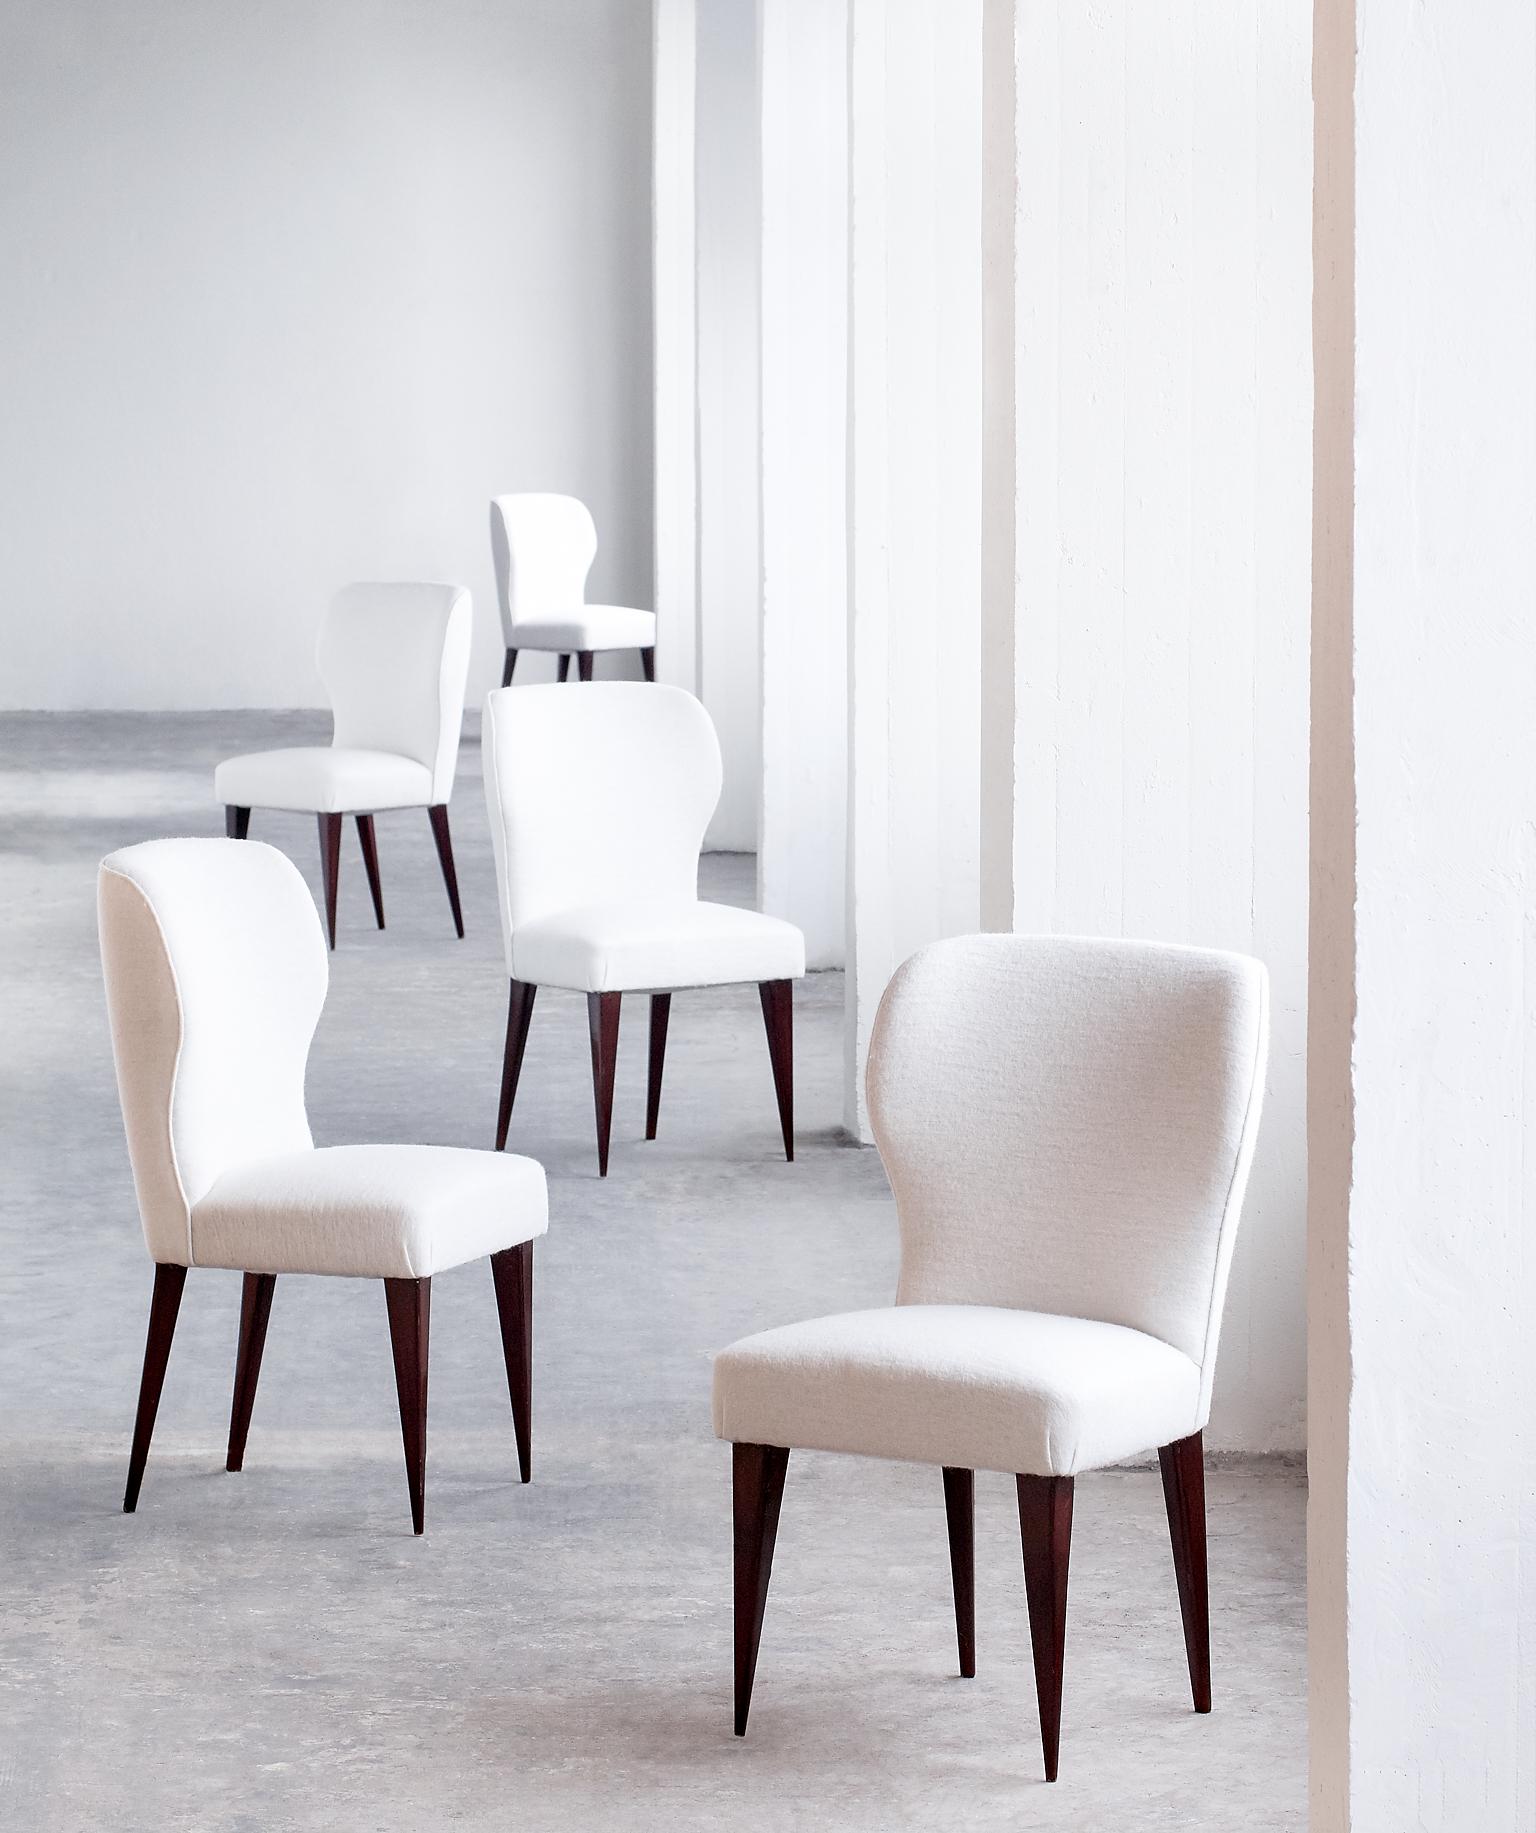 A rare set of five dining chairs designed by Gio Ponti in collaboration with Lio Carminati for the Casa E Giardino company in 1942. The particularly graphical lines of the tapered mahogany legs and the curved backrests give the chairs a modern and